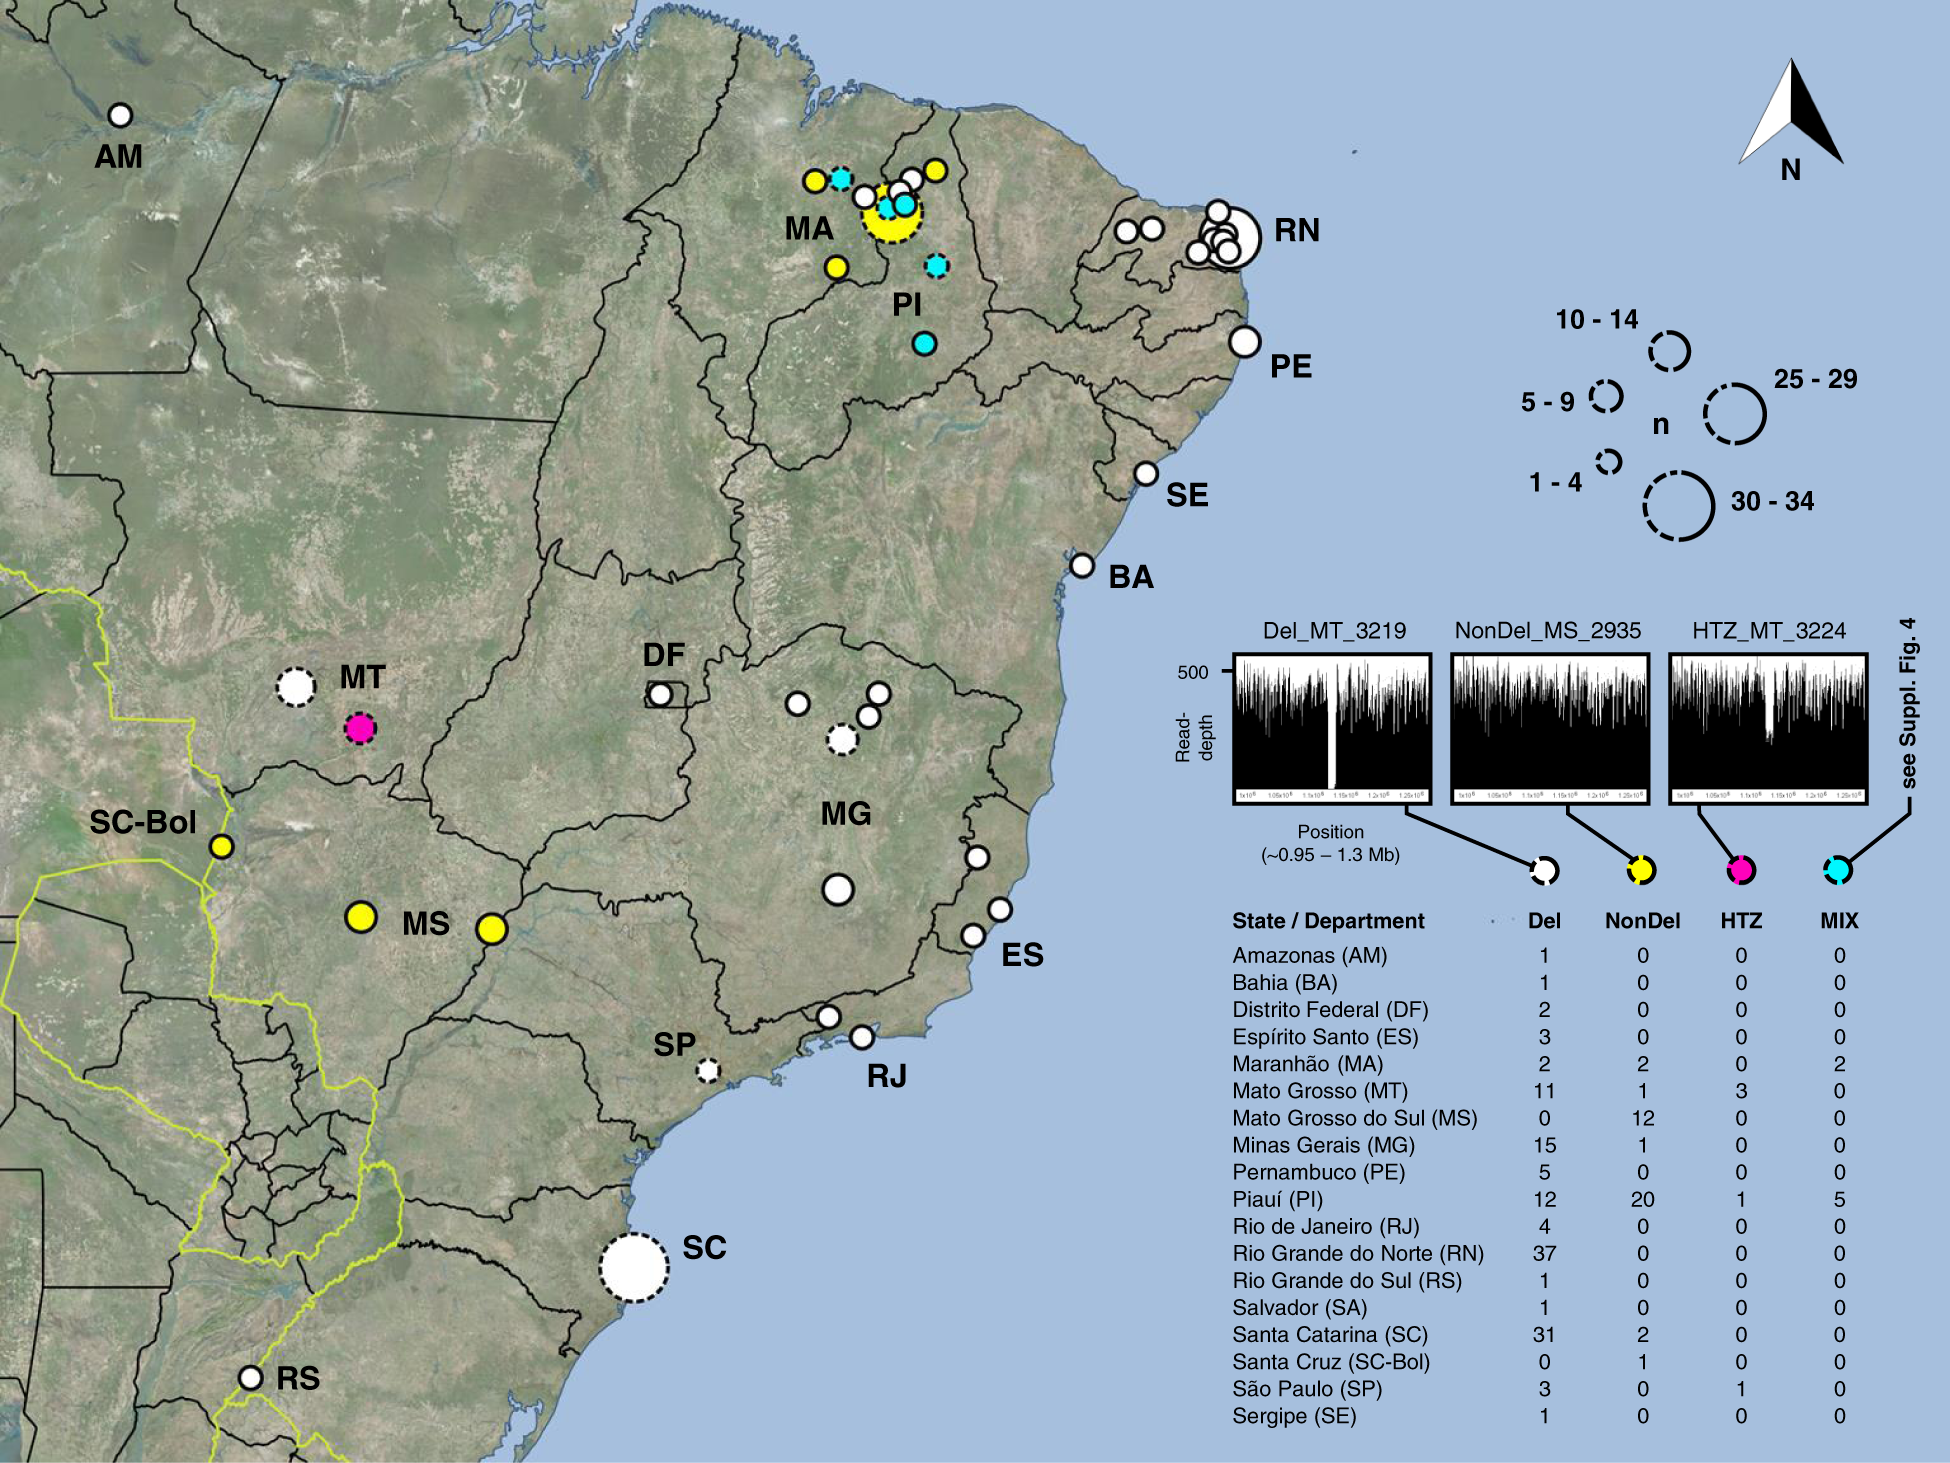 Colonization and genetic diversification processes of Leishmania infantum in the Americas Communications Biology image